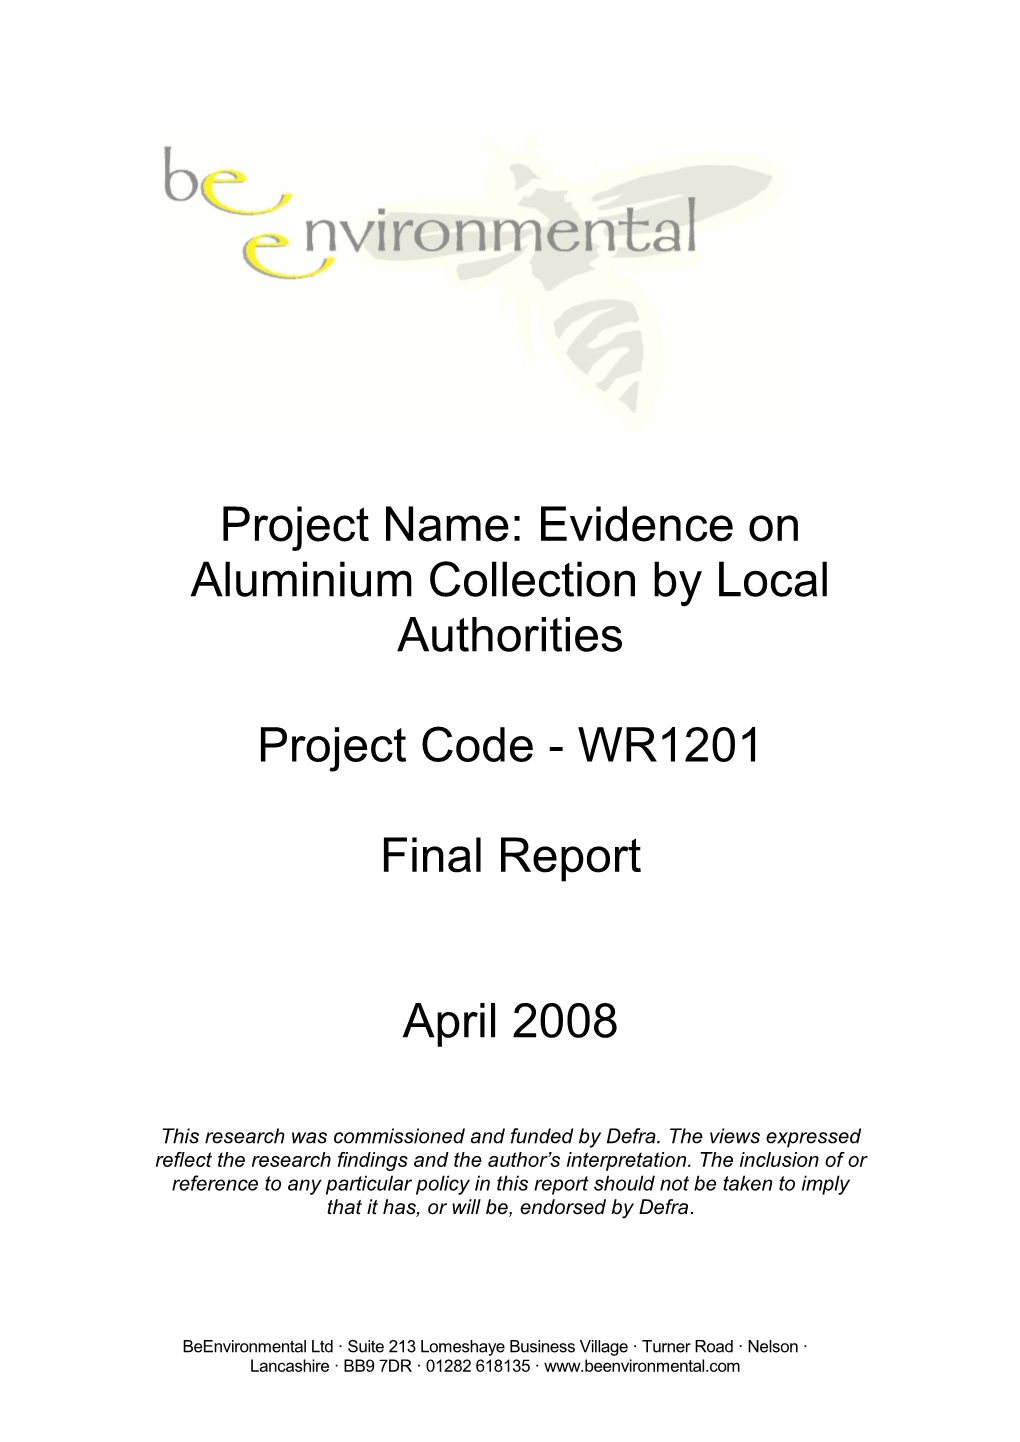 Evidence on Aluminium Collection by Local Authorities Project Code